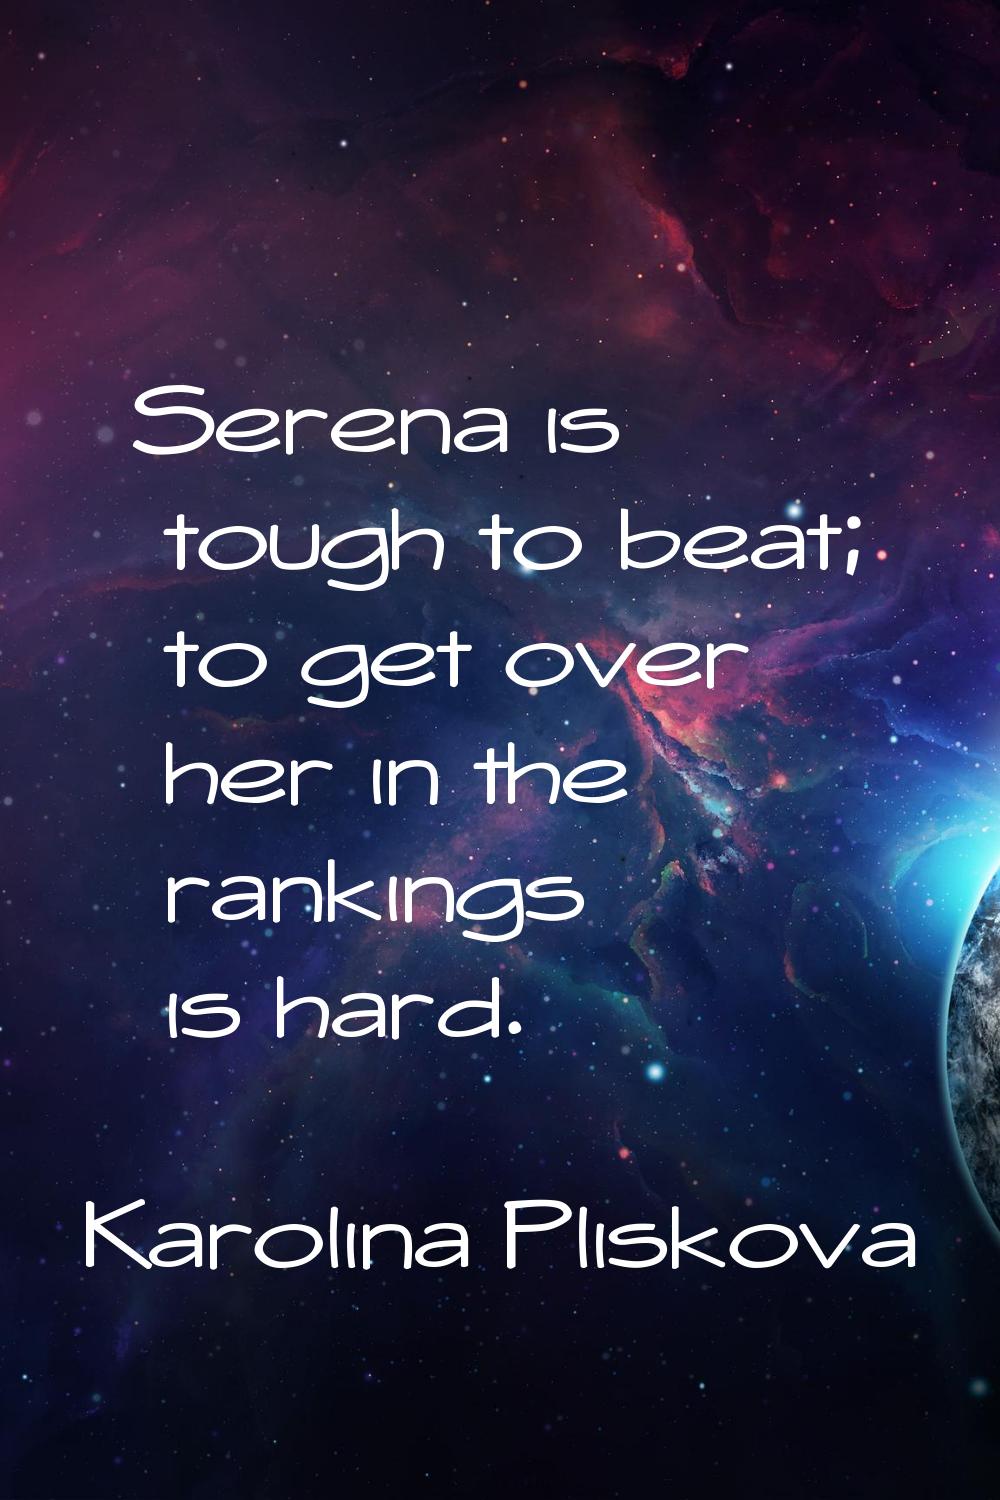 Serena is tough to beat; to get over her in the rankings is hard.